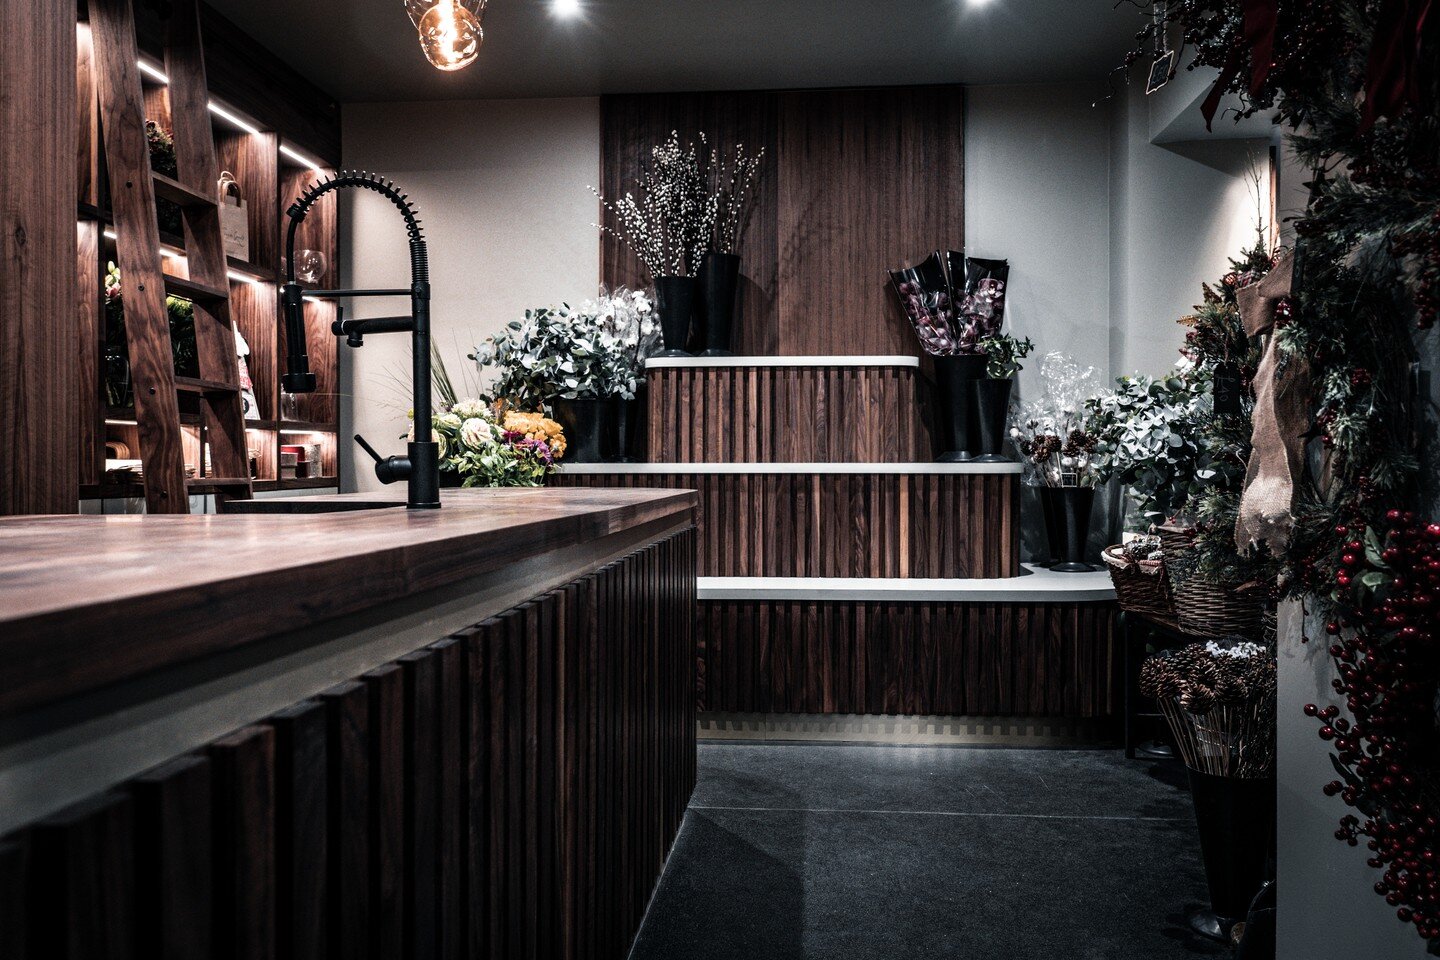 Victoria Gault Florists, Queens Arcade, Belfast.

@victoriagaultflorist is an Interflora florist with the freshest flowers and reliable local flower delivery based in #belfast 

Featuring a curved walnut counter with a matt black sink and matching fa